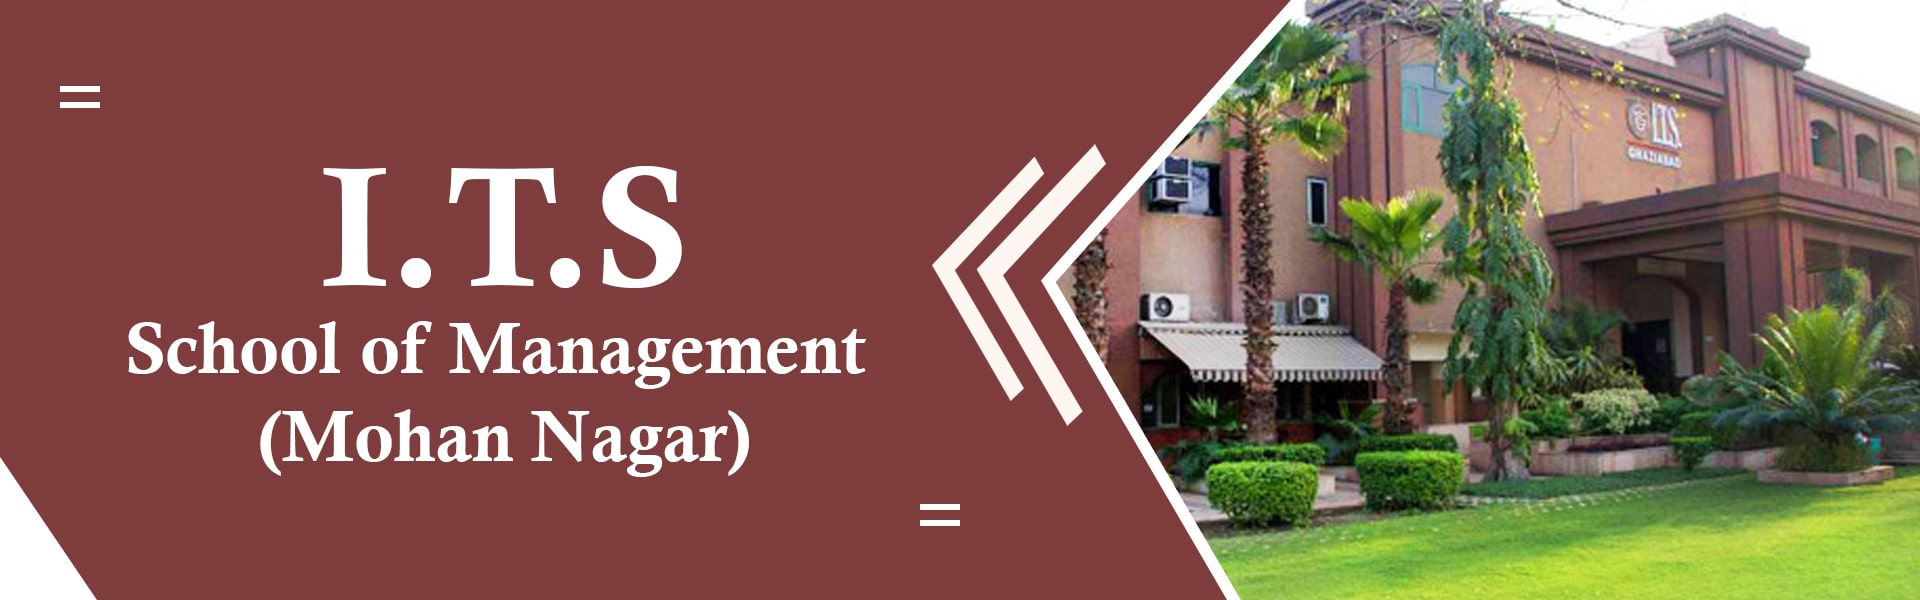 School of Management (Mohan Nagar), Courses, Fees, Ranking, Placement